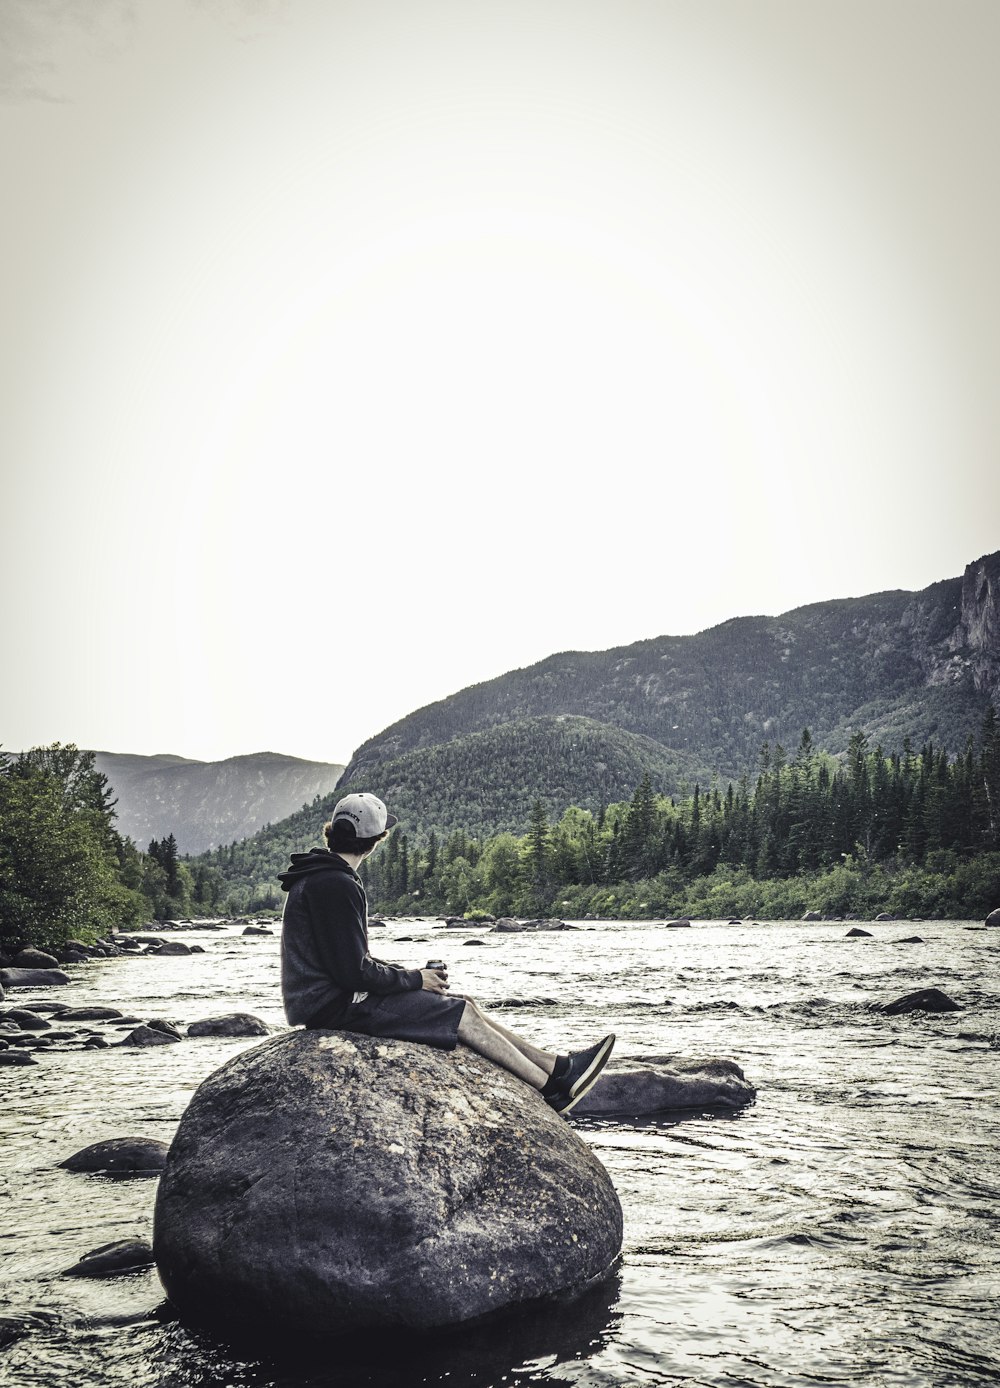 man sitting on rock viewing river and mountain during daytime